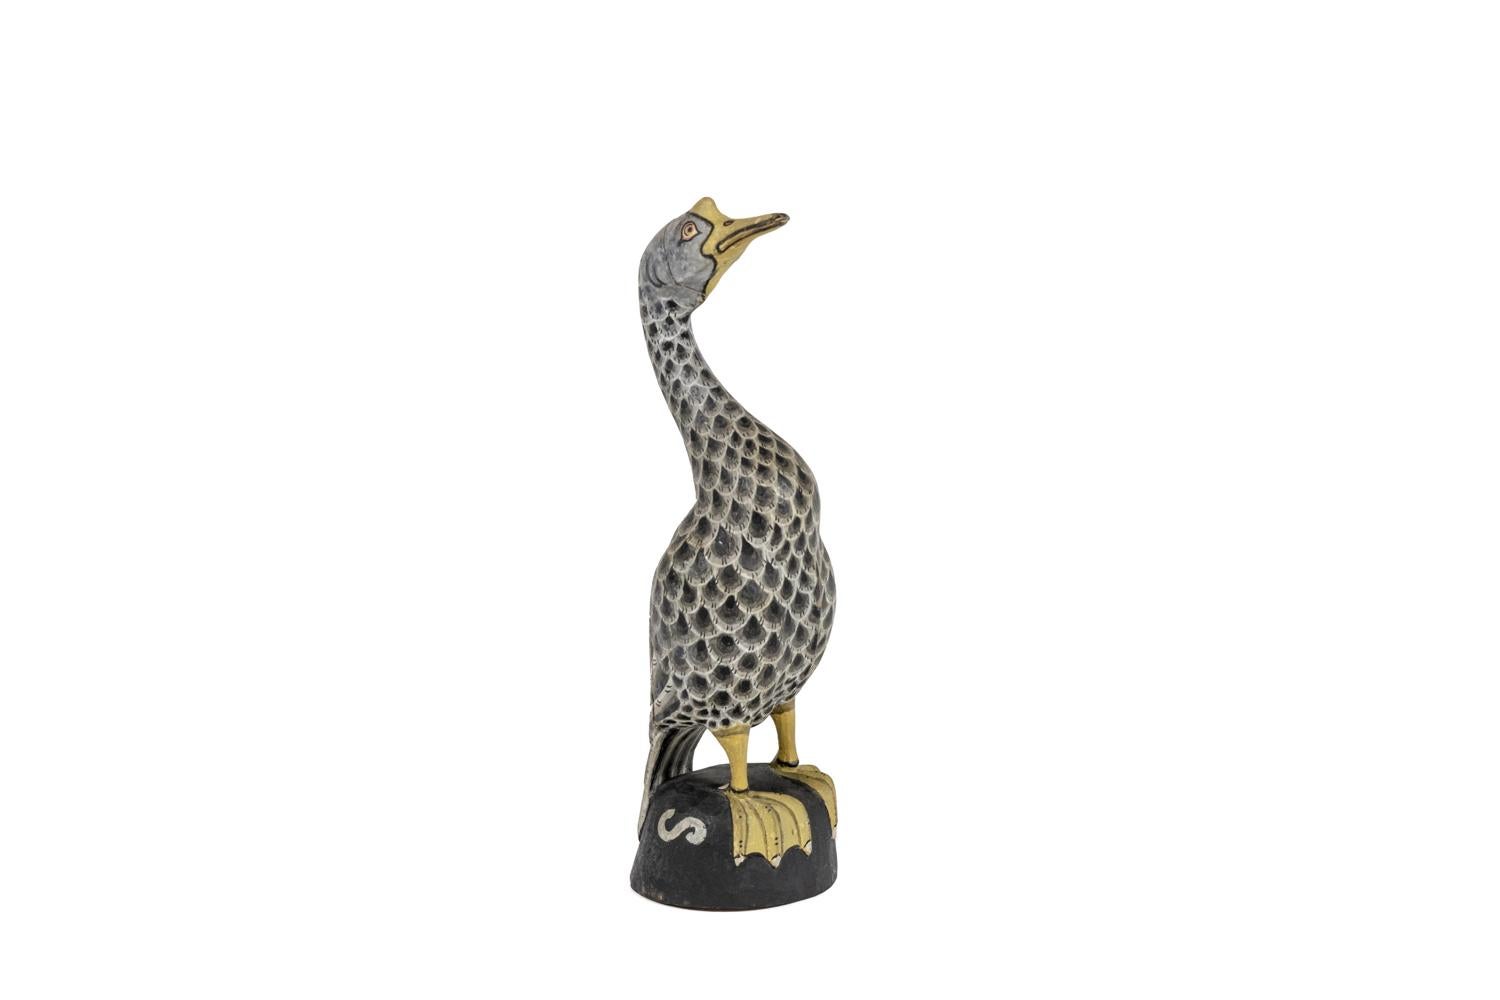 Ducks in carved and lacquered wood, in shades of yellow, grey, black and beige.

French work realized in the 1950s.

The price is indicated per unit!